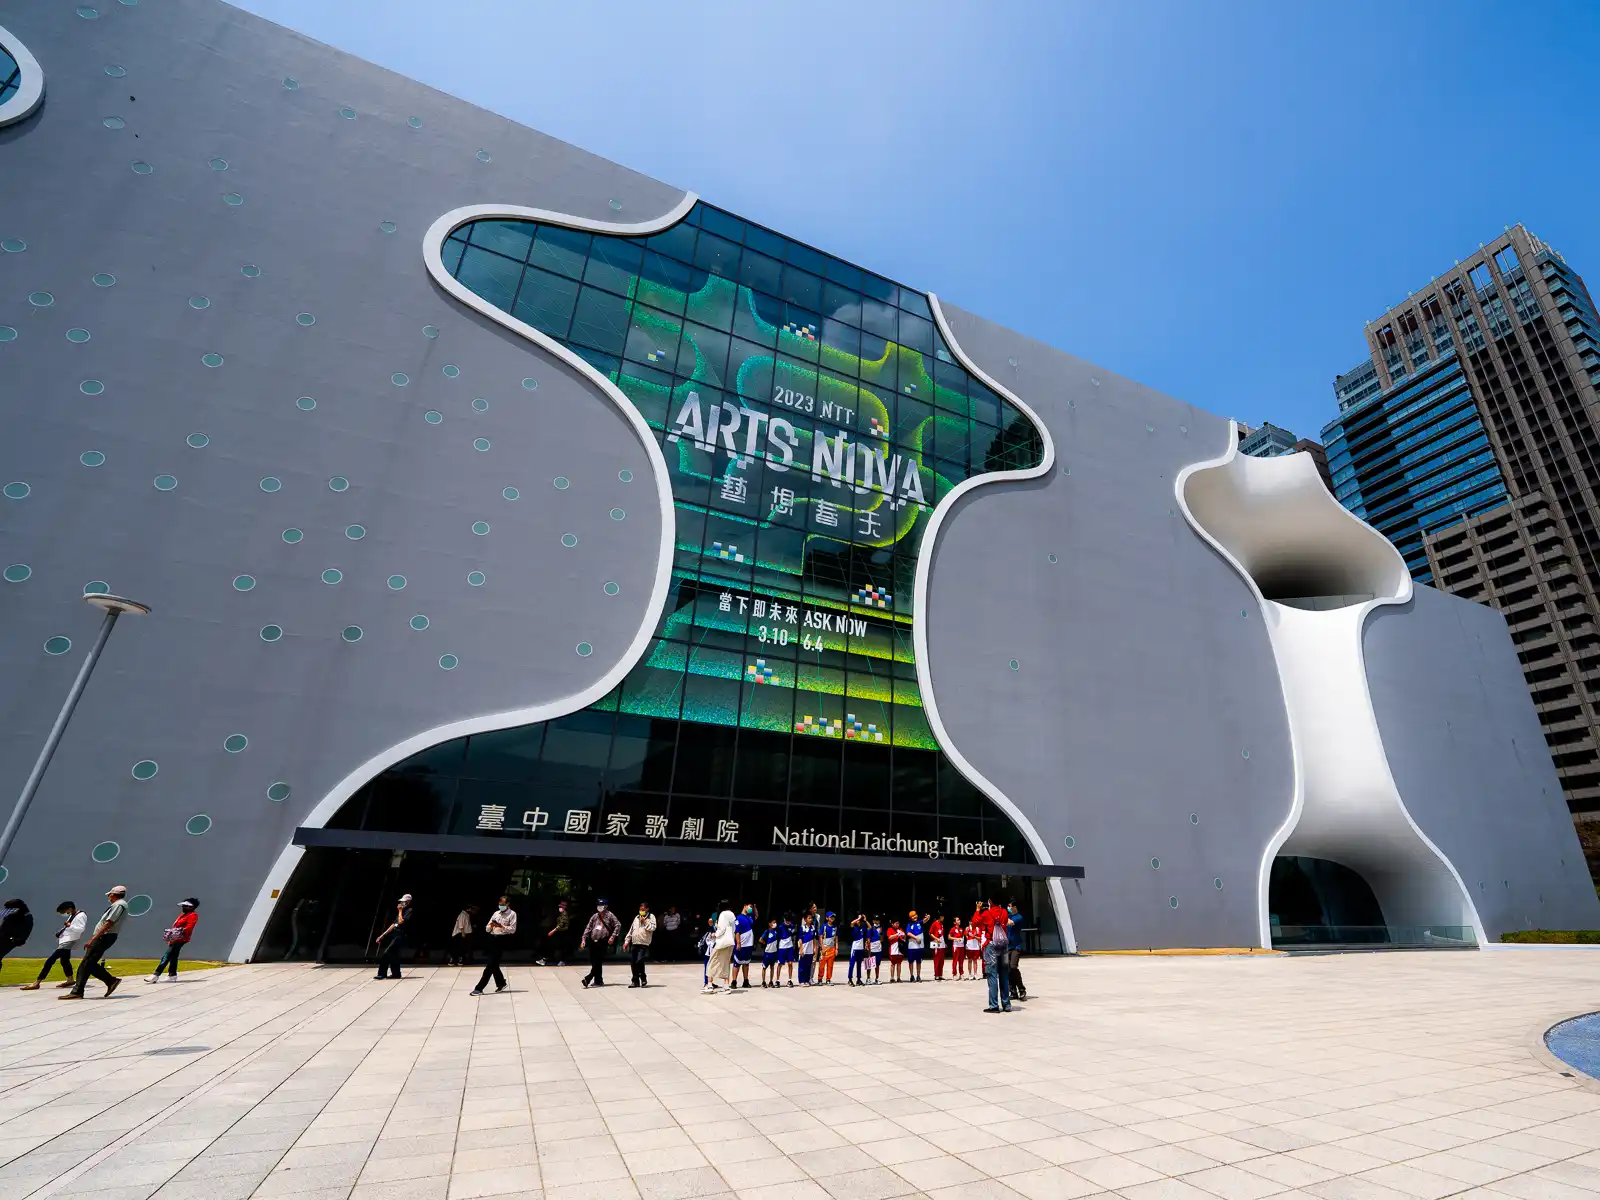 The front facade of National Taichung Theater is simple with flowing edges.